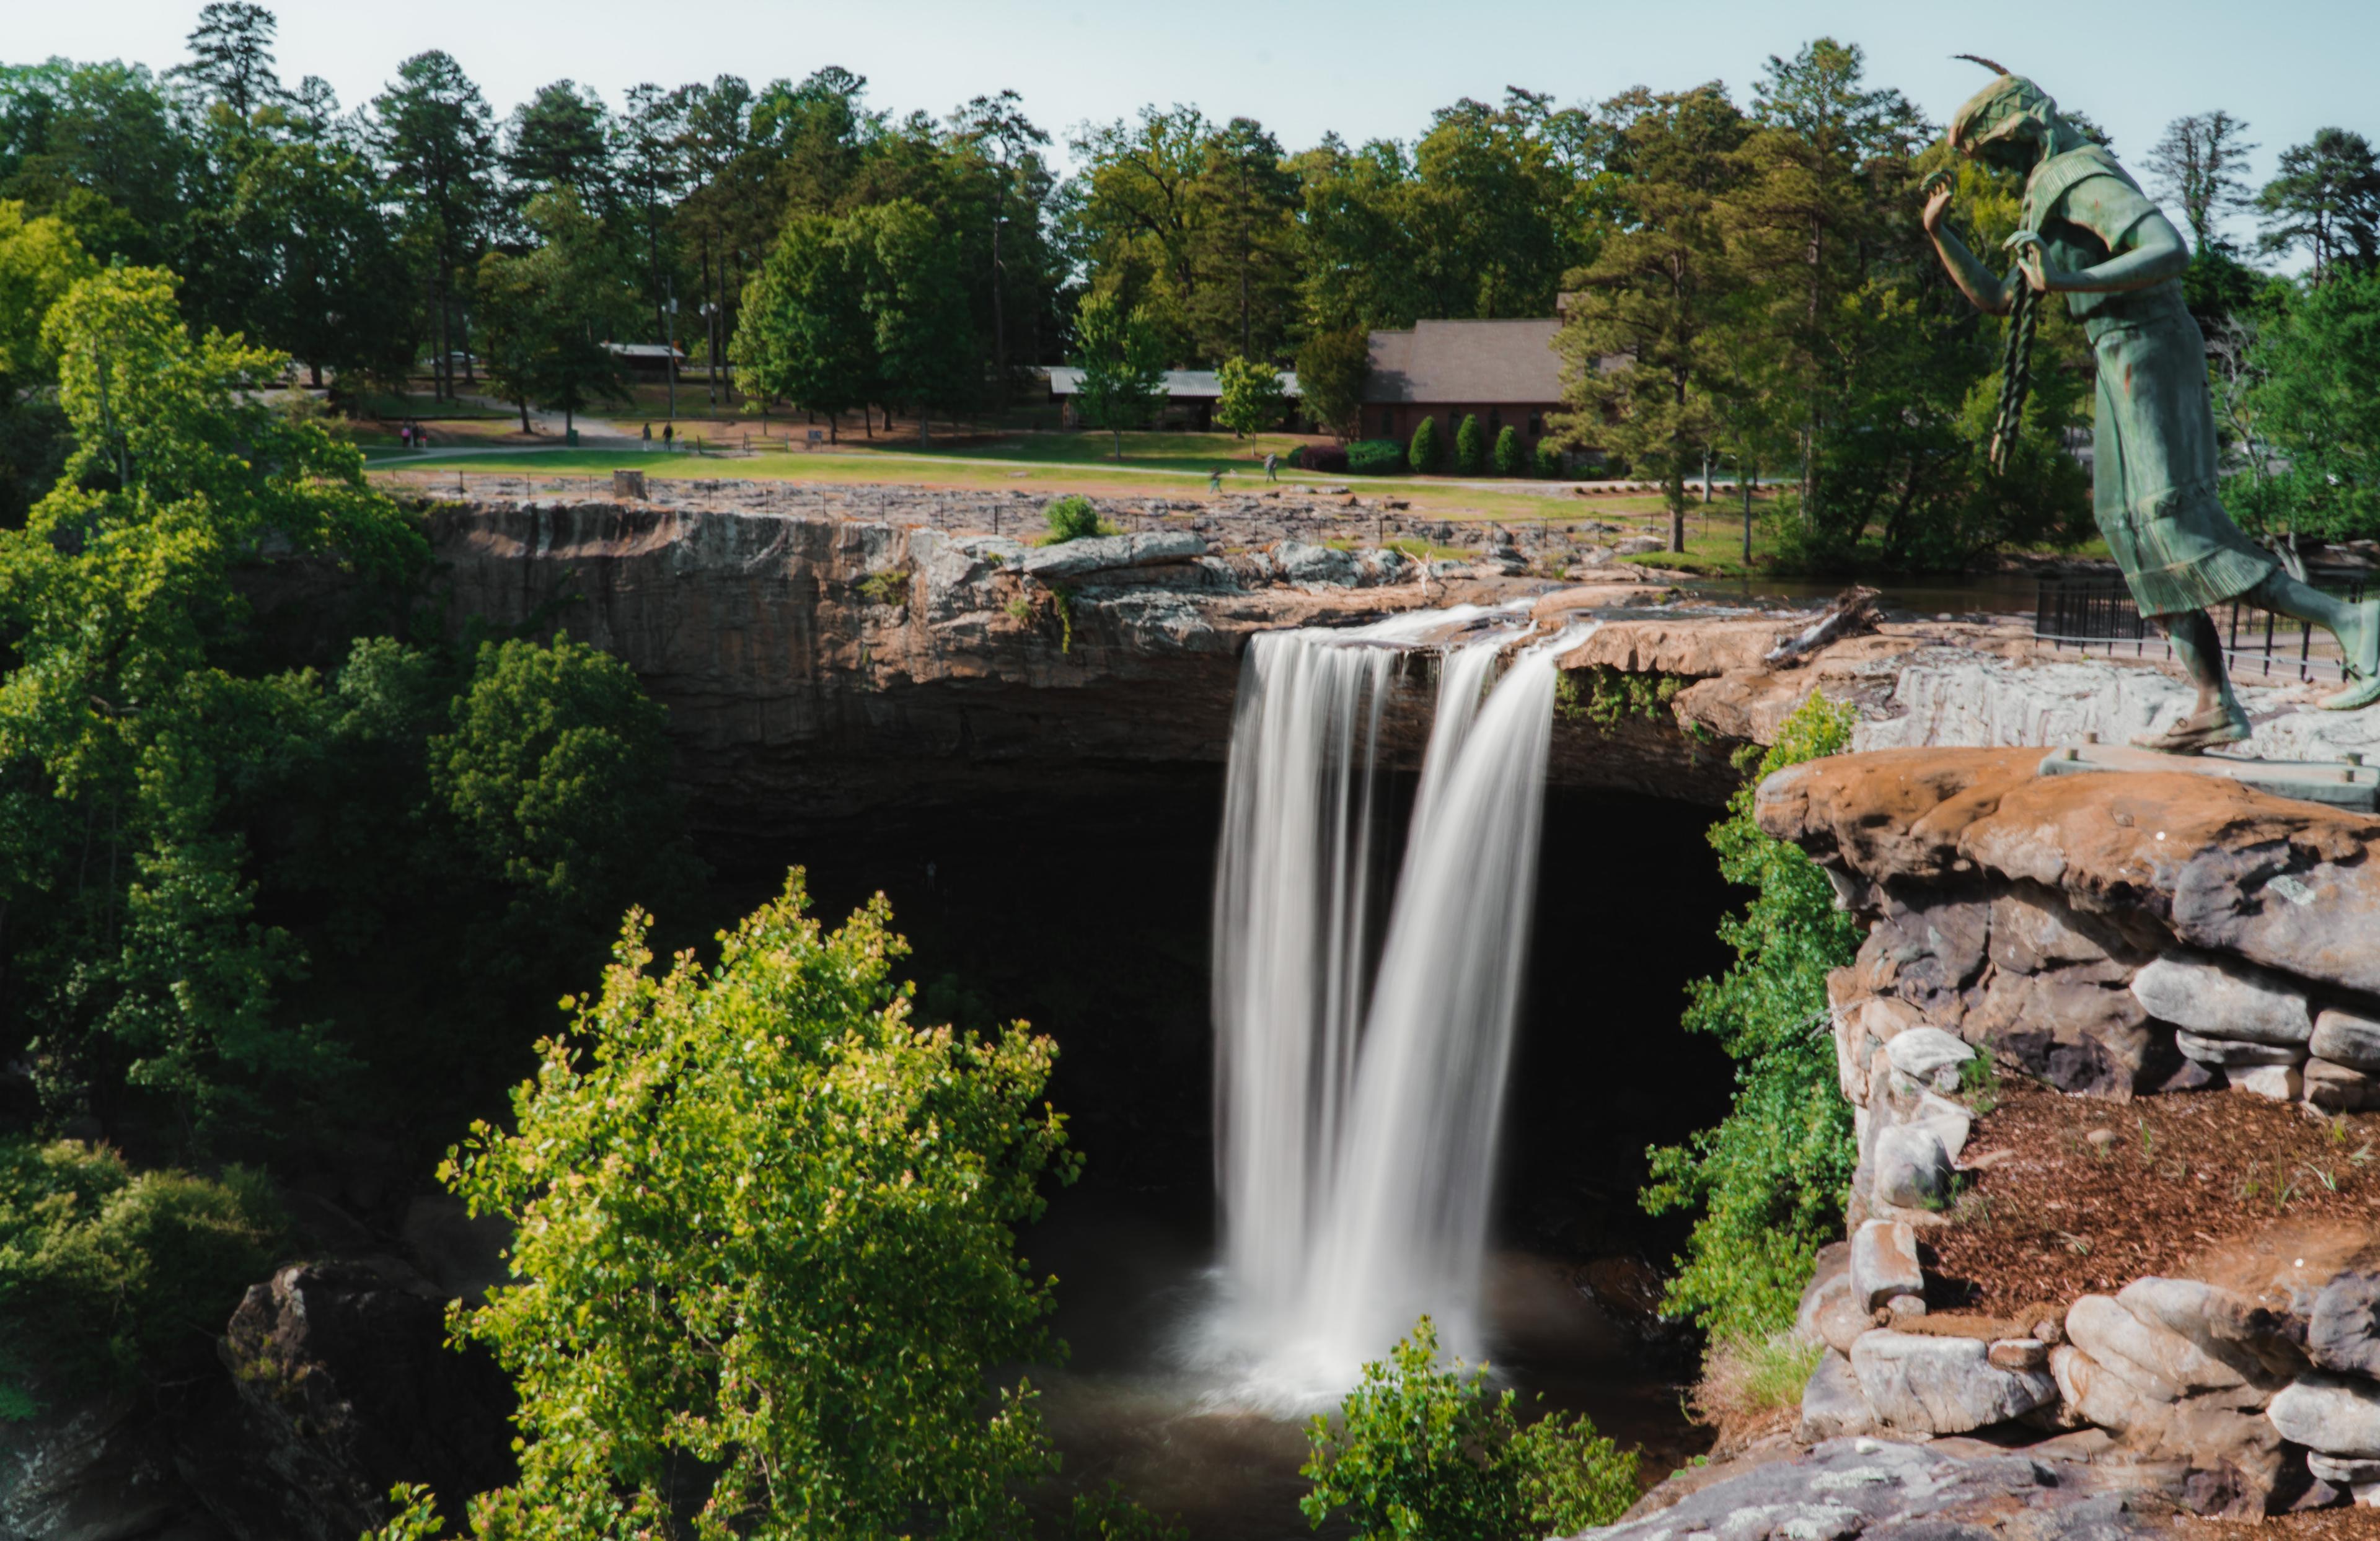 View of the Noccalula Falls in Gadsden Alabama.